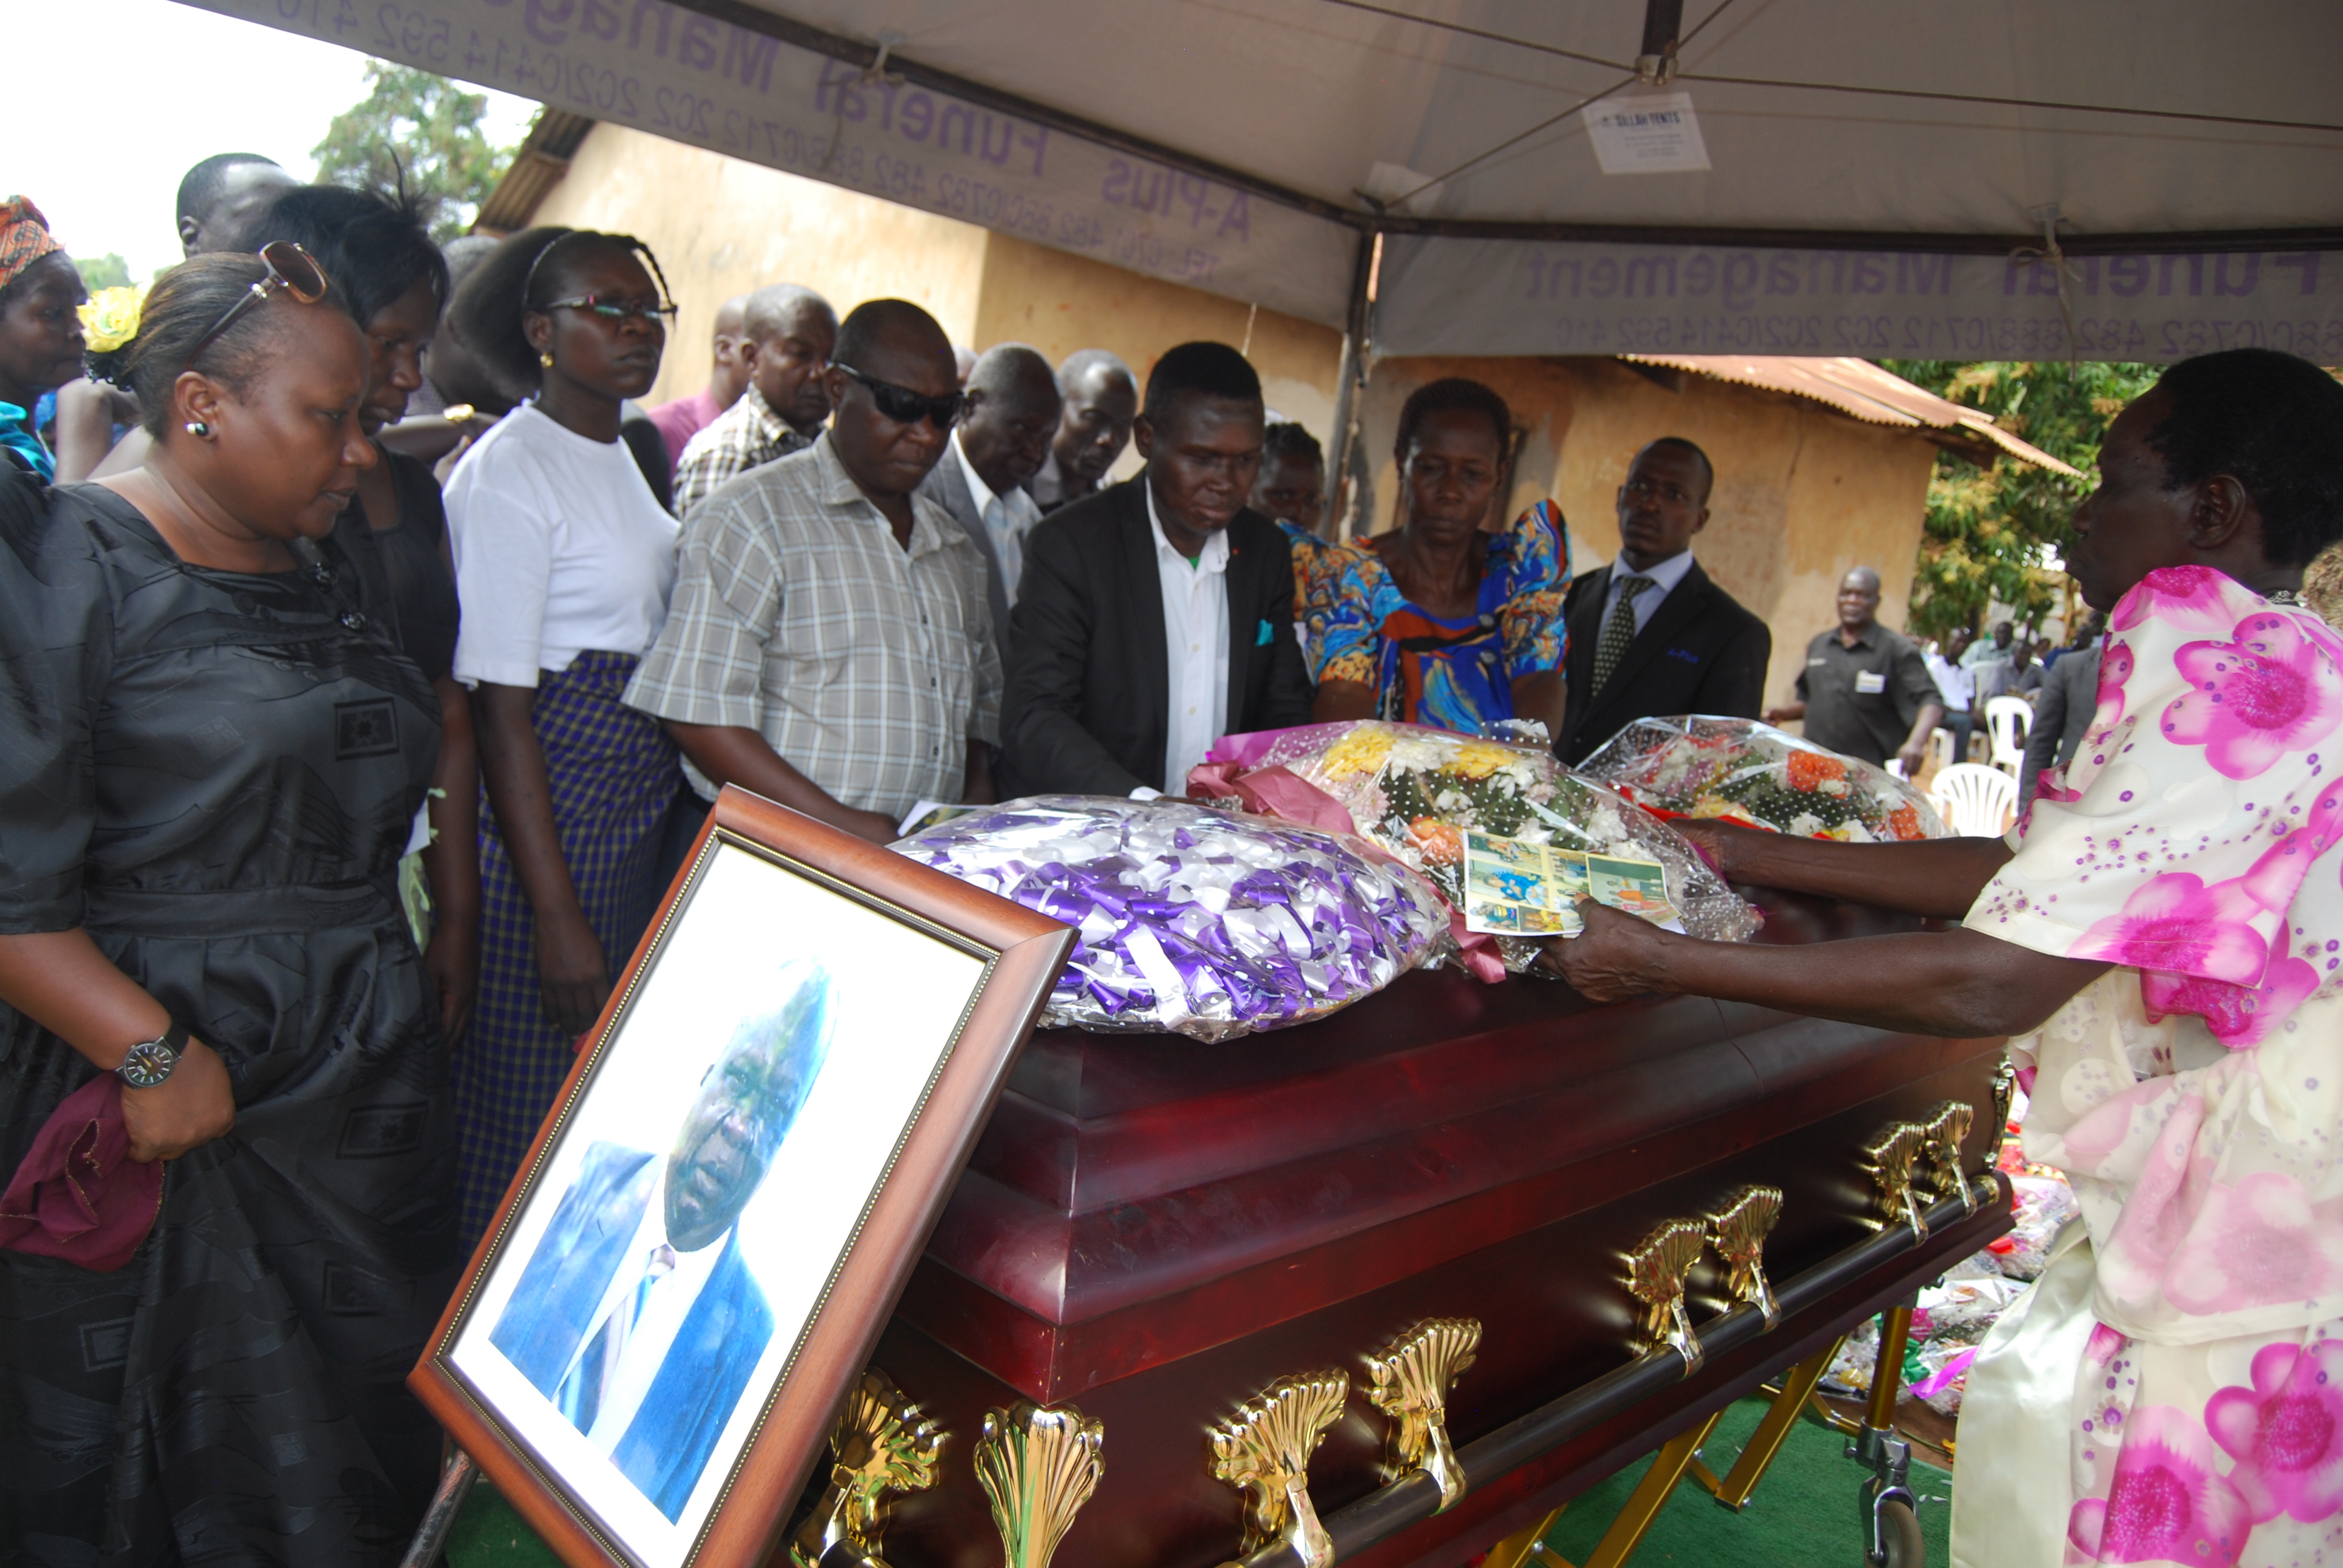 Mao and relatives lay wreath on the casket of his late father Dusman Okee